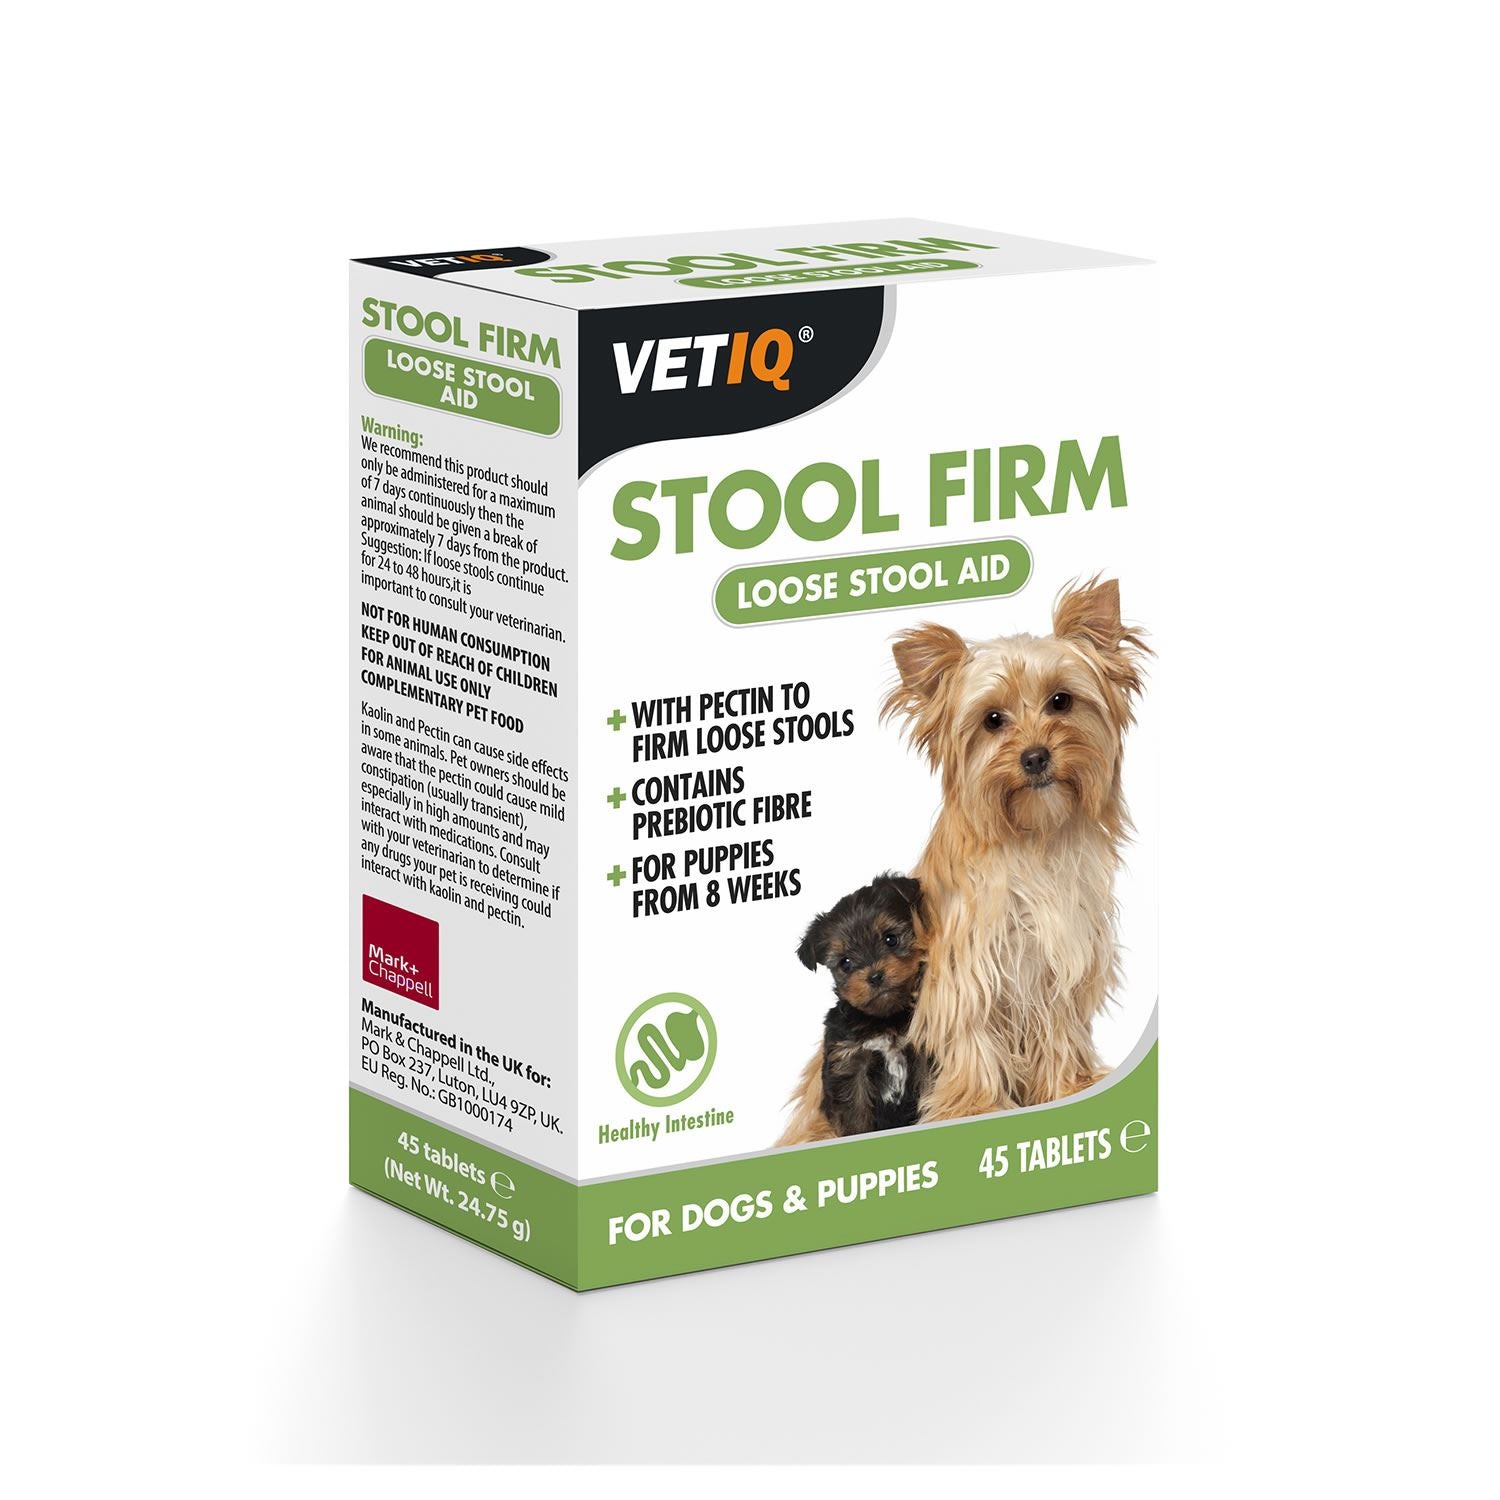 Vetiq Stool Firm Tablets For Dogs & Puppies - Just Horse Riders